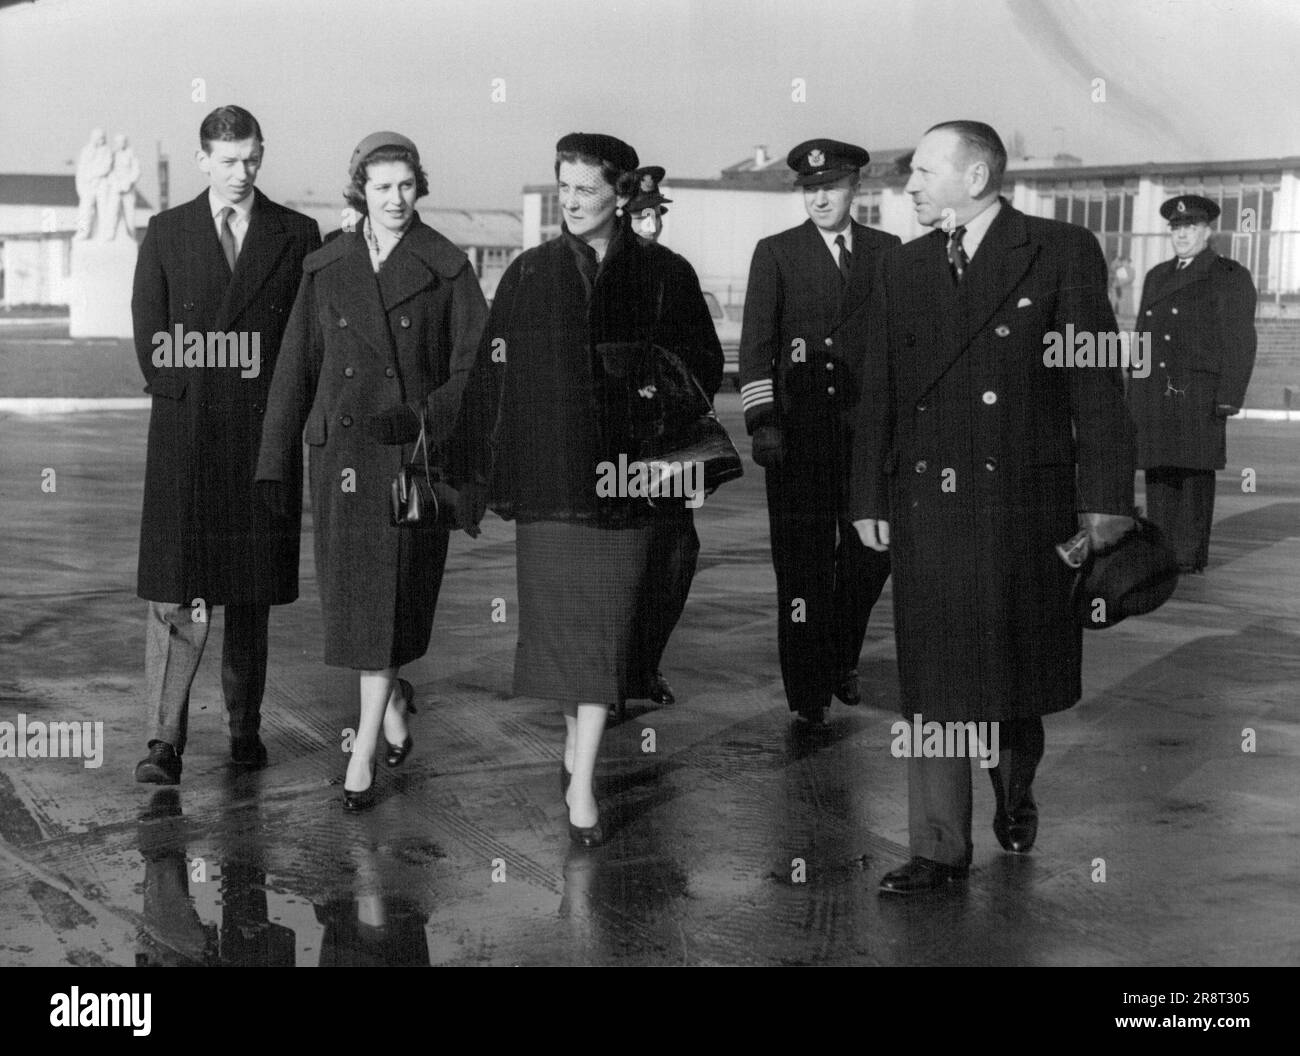 Duchess And Family Fly To Royal Wedding -- (Left to right) The Duke of Kent, Princess Alexandra, the Duchess of Kent walking to their plane at London airport this morning, accompanied by Sir John Obalbiac, the Airport Commodore. The Duchess of Kent, accompanied by Princess Alexandra and the Duke of Kent, Left London airport today for Portugal, where they are to attend Saturday's wedding of the Duchess's Nephew, Prince Alexander of Yugoslavia, to Prince Alexander of Yugoslavia, to Prince Maria Pia, daughter of Ex-King Umberto of Italy. There is to be a Gala reception at Estoril, the Holida… Stock Photo